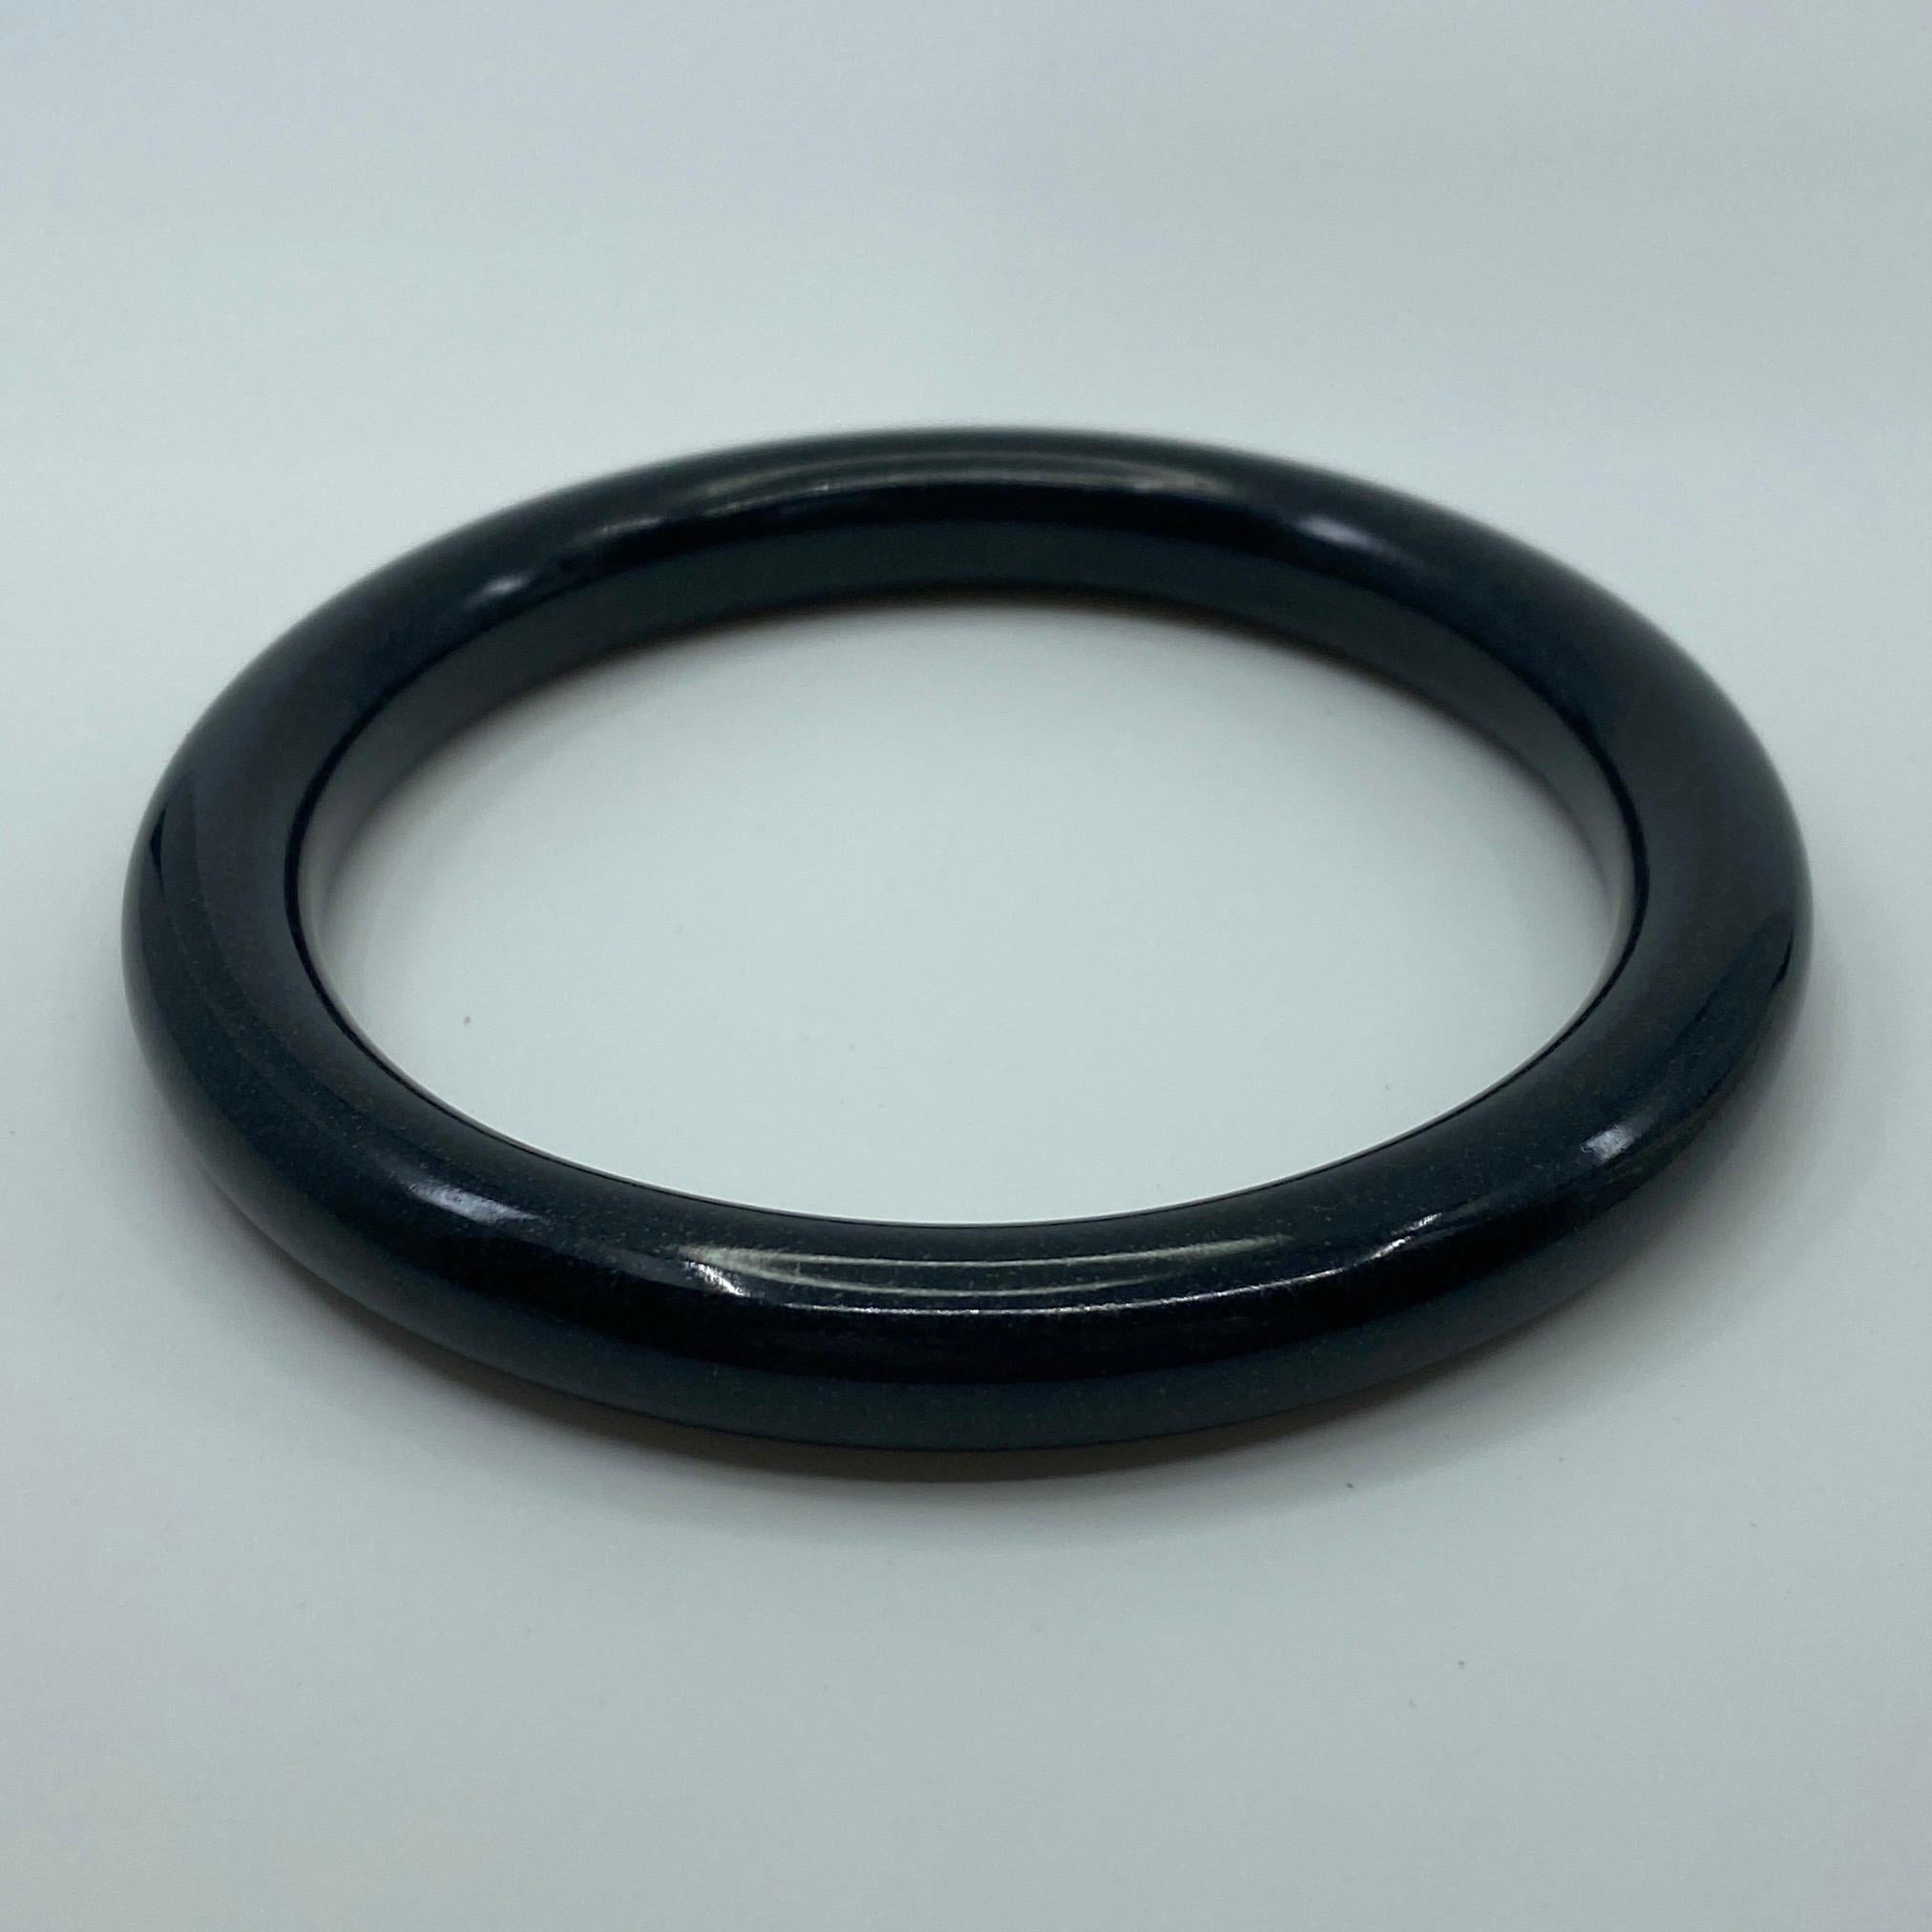 AIG Certified Natural Black Jade Bangle Bracelet 53.52g

Has a beautiful rich black colour with an excellent polish and lustre with no cracks or chips.

This is a treated jade bracelet, as to be expected of such a large piece in this price